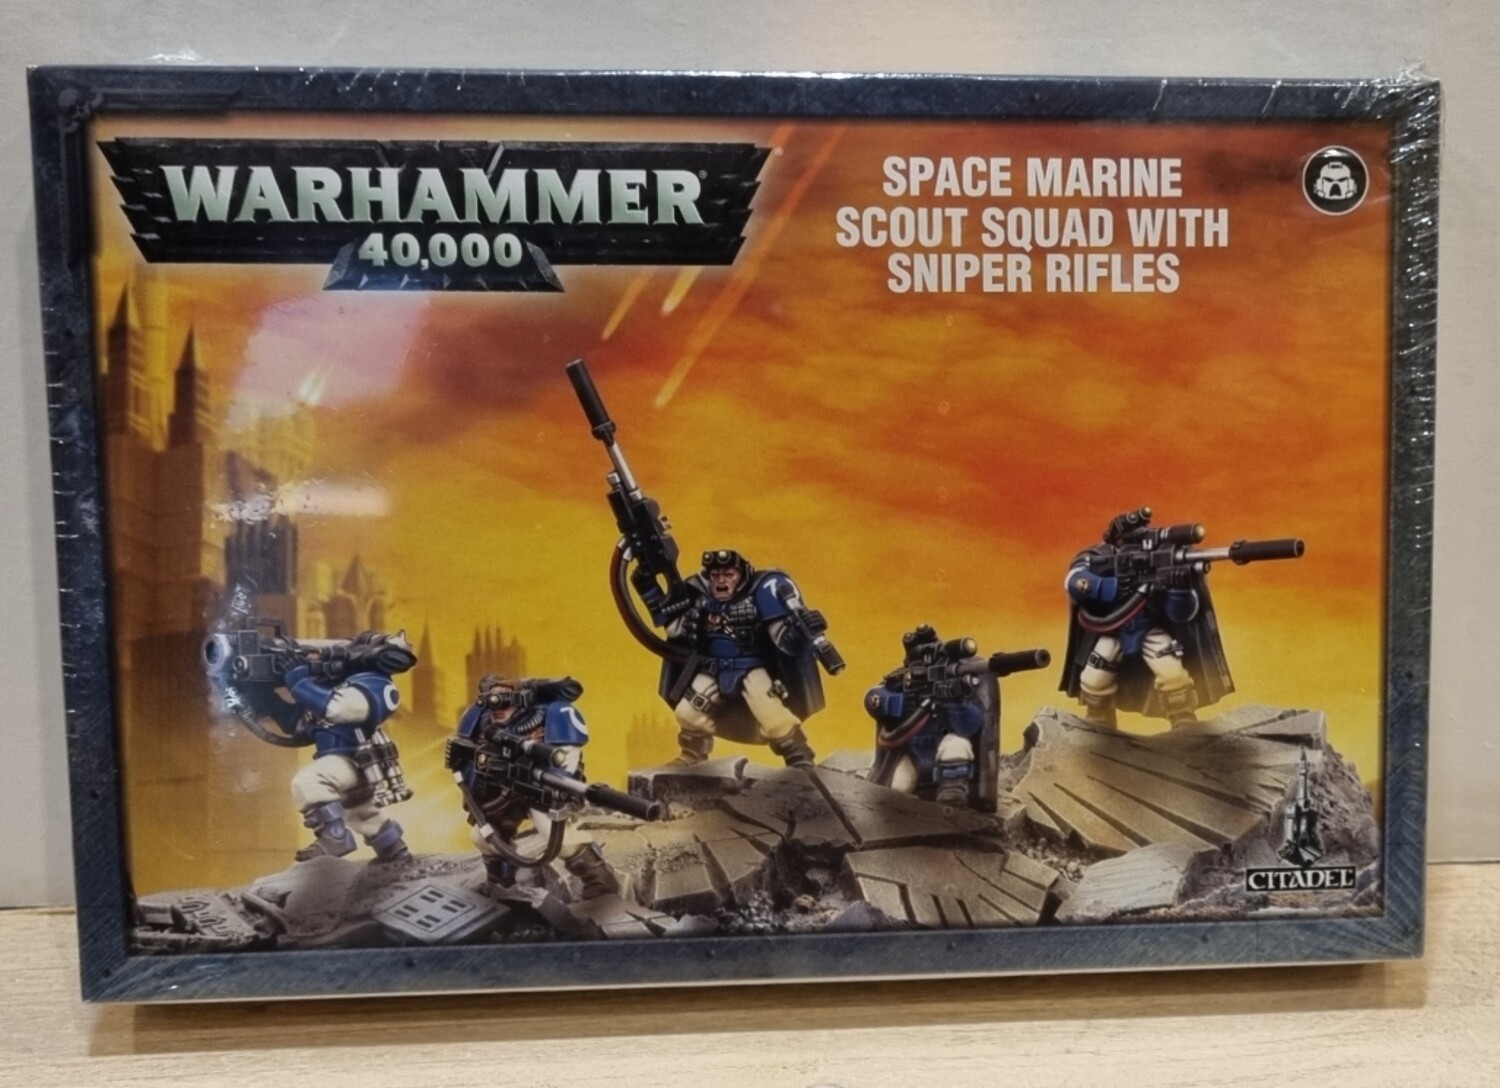 Warhammer, 40k, 48-29, Space Marine, Scout Squad with sniper rifles